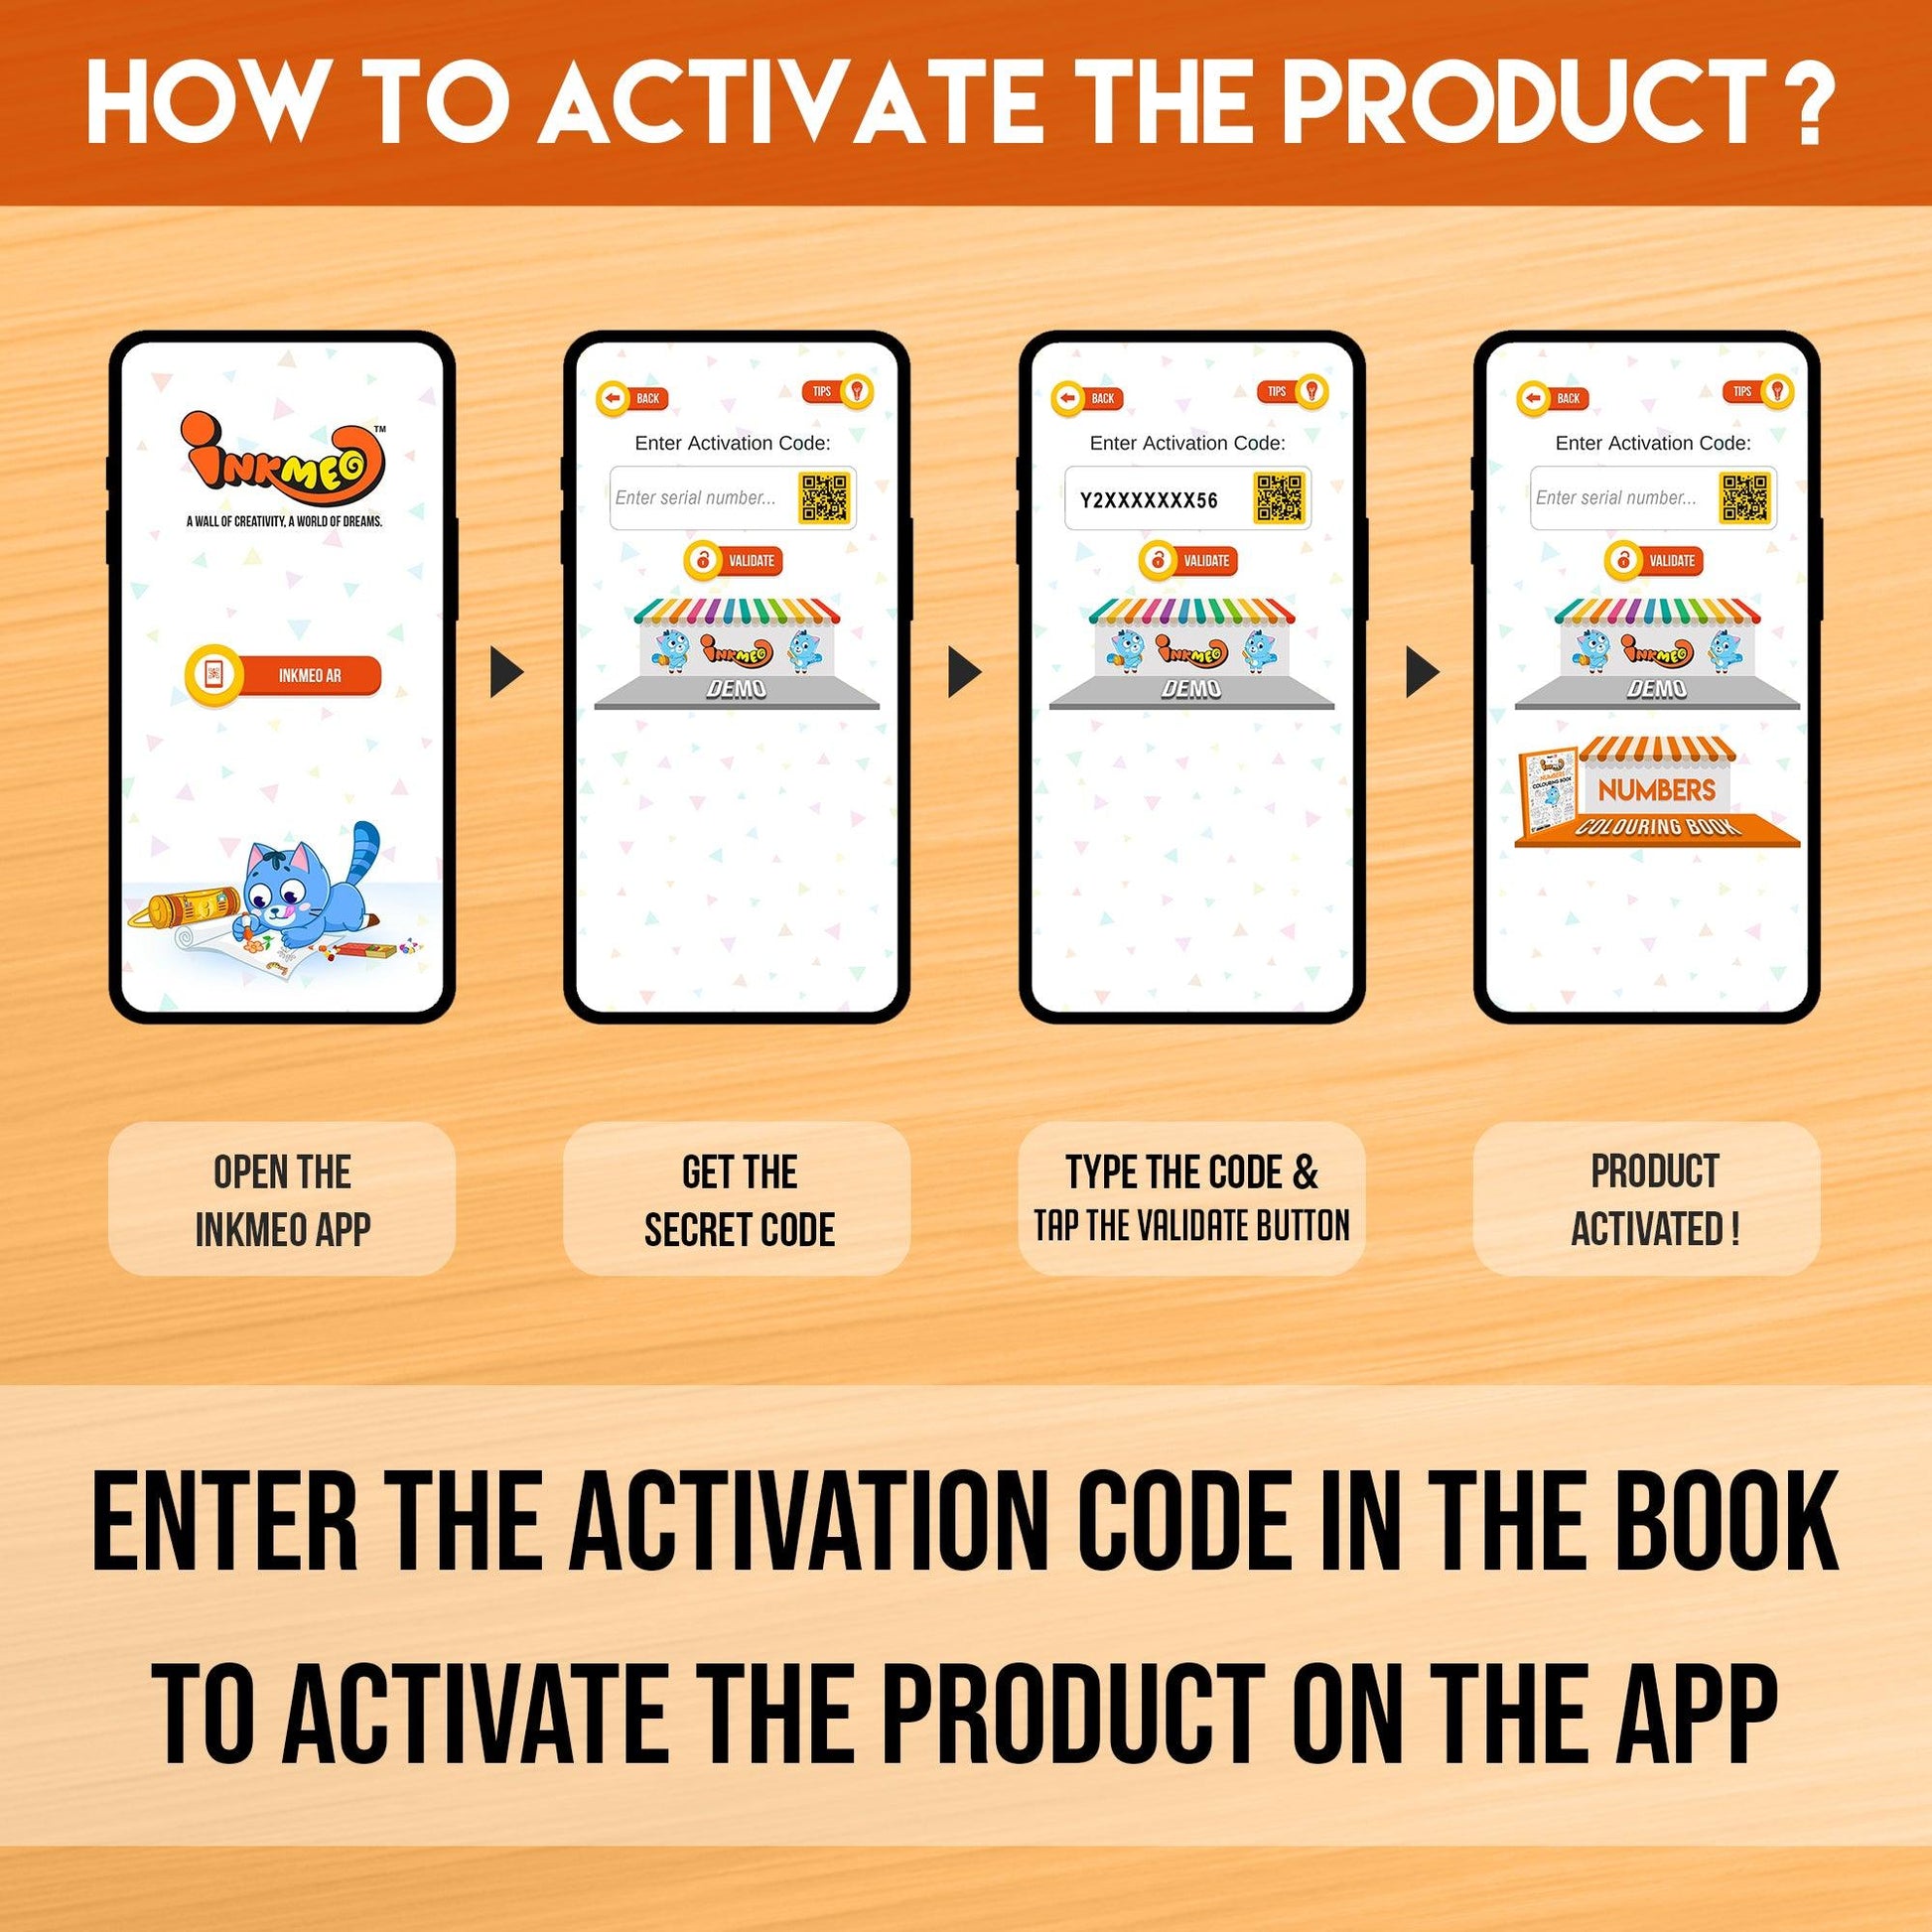 The image displays an orange background with four phones showcasing the message "To access the Inkmeo app, acquire the secret code, input the code, and tap for validation to activate the product.